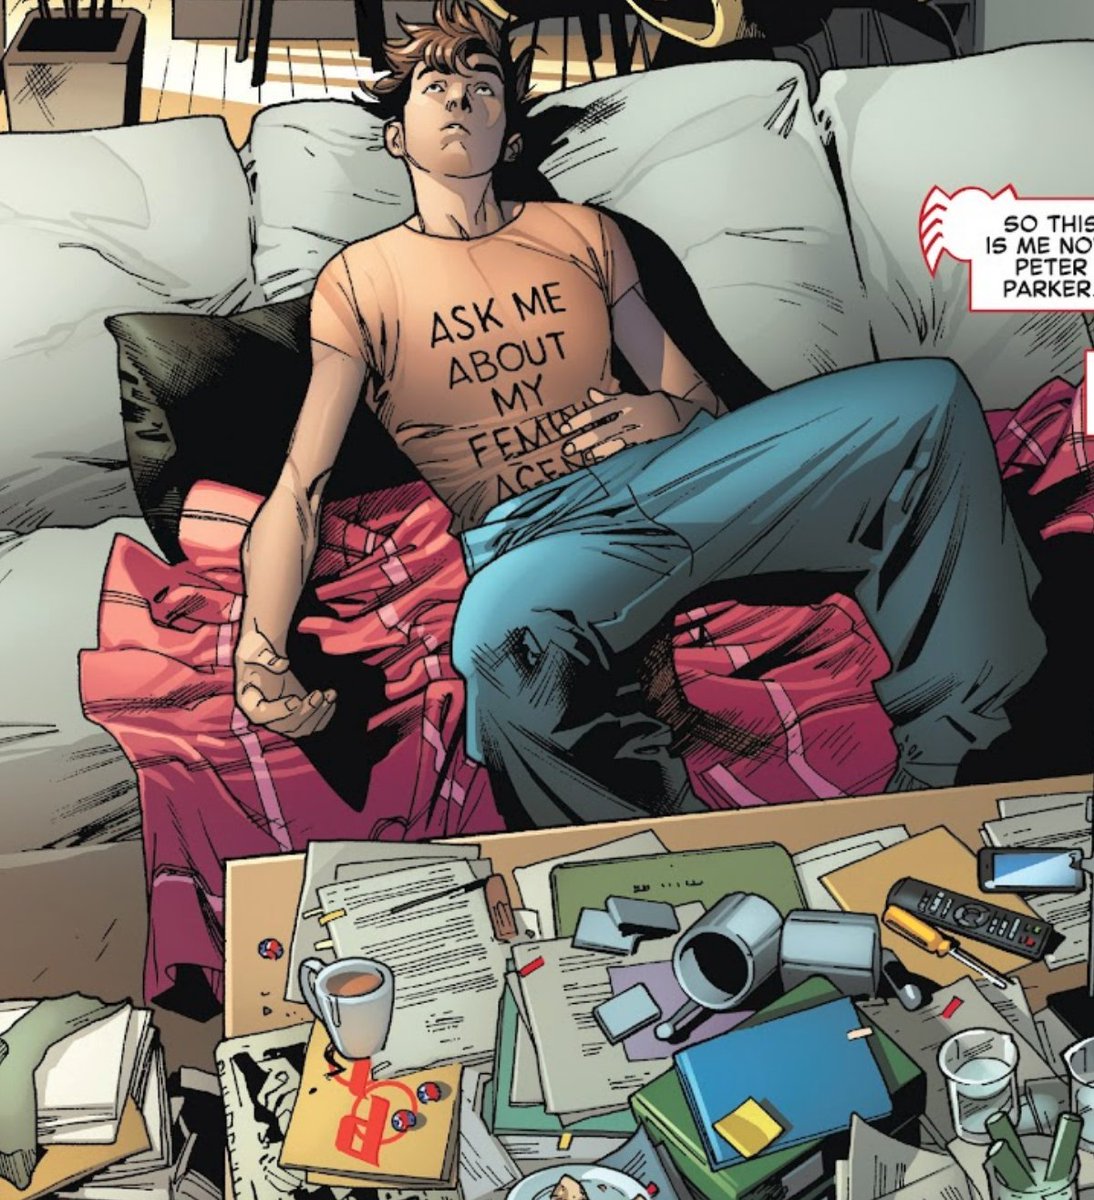 #PeterParker will always be, lifes loveable loser